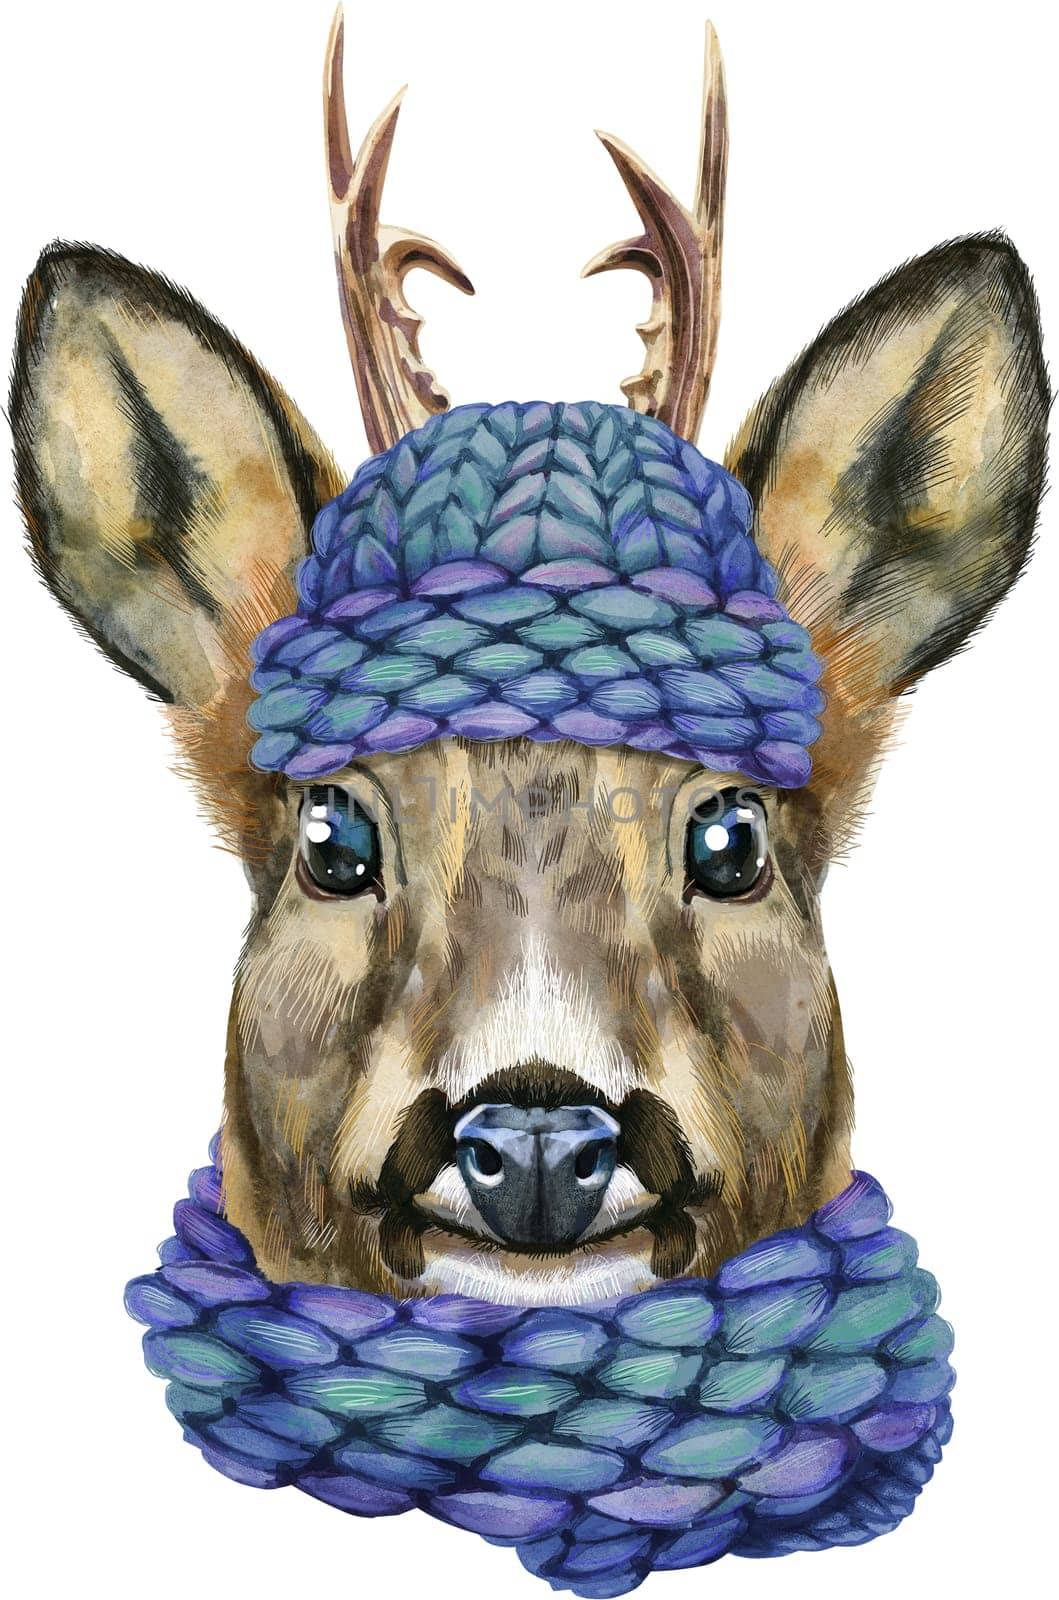 Watercolor portrait of a roe deer in a blue knitted hat and scarf on white background by NataOmsk